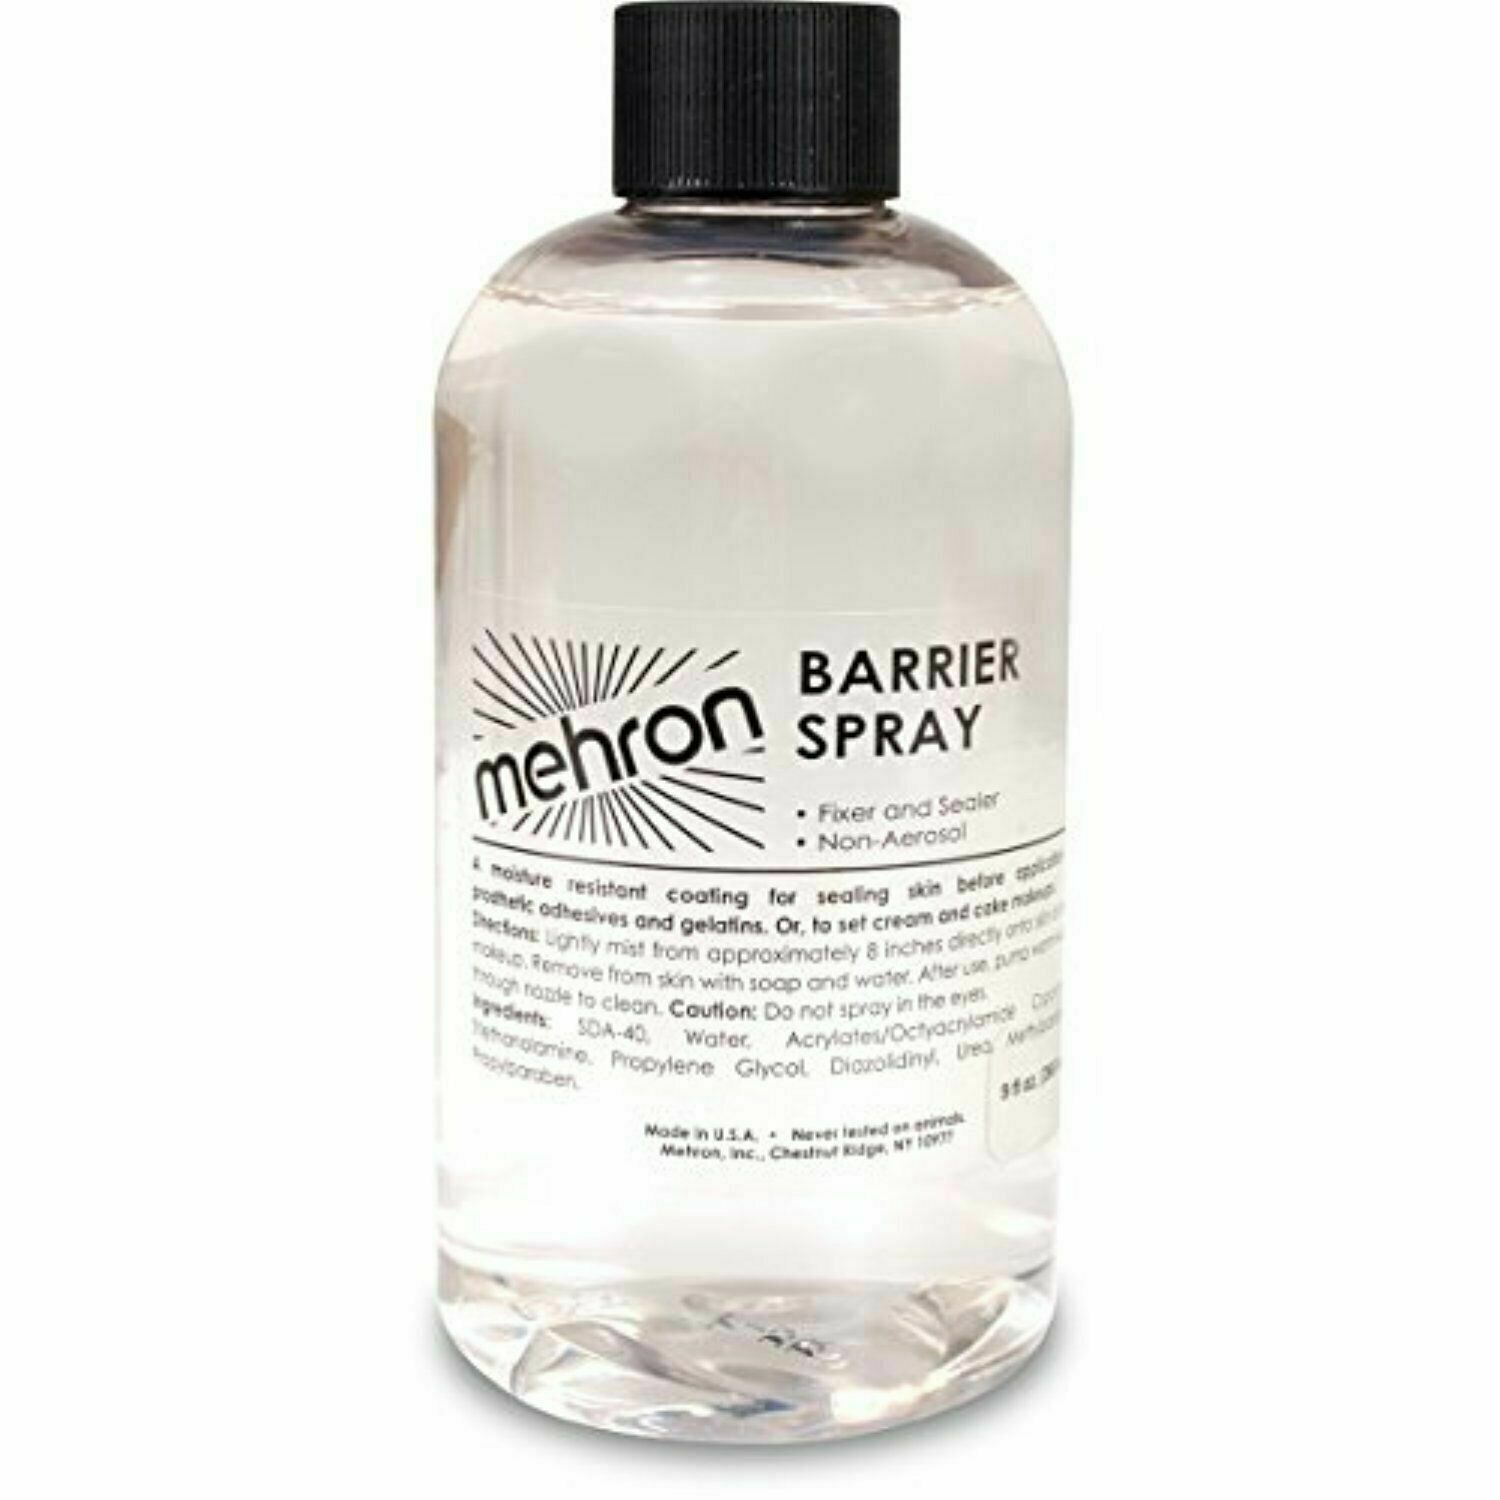 Mehron Barrier Spray REFILL Sets and Seals Makeup  Ships Fast 9 oz USA